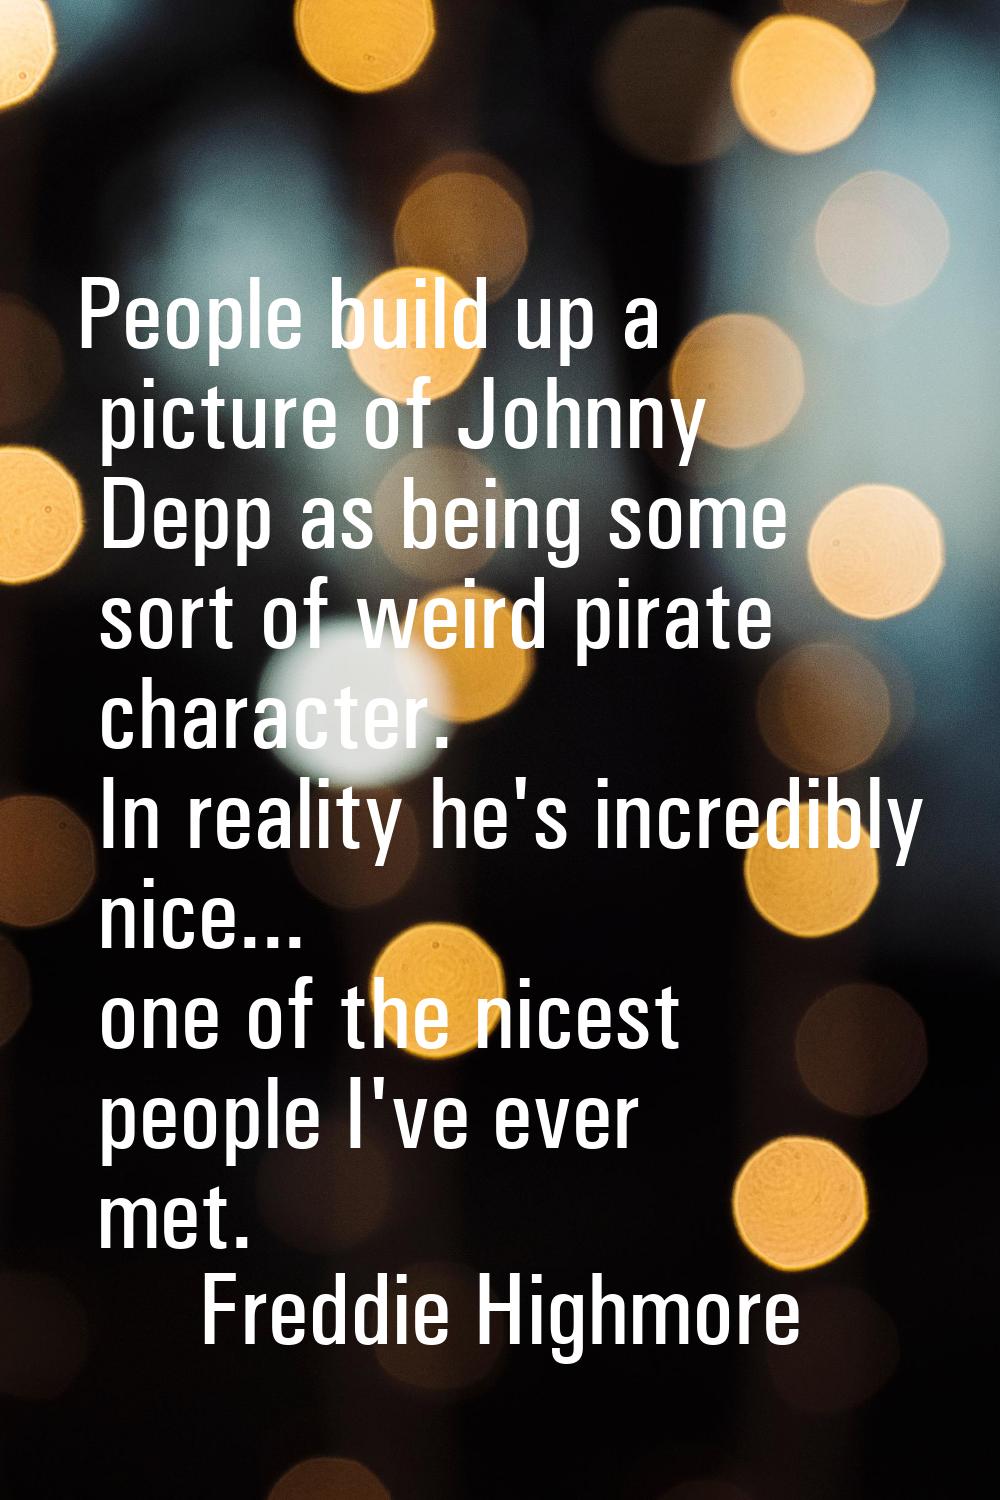 People build up a picture of Johnny Depp as being some sort of weird pirate character. In reality h